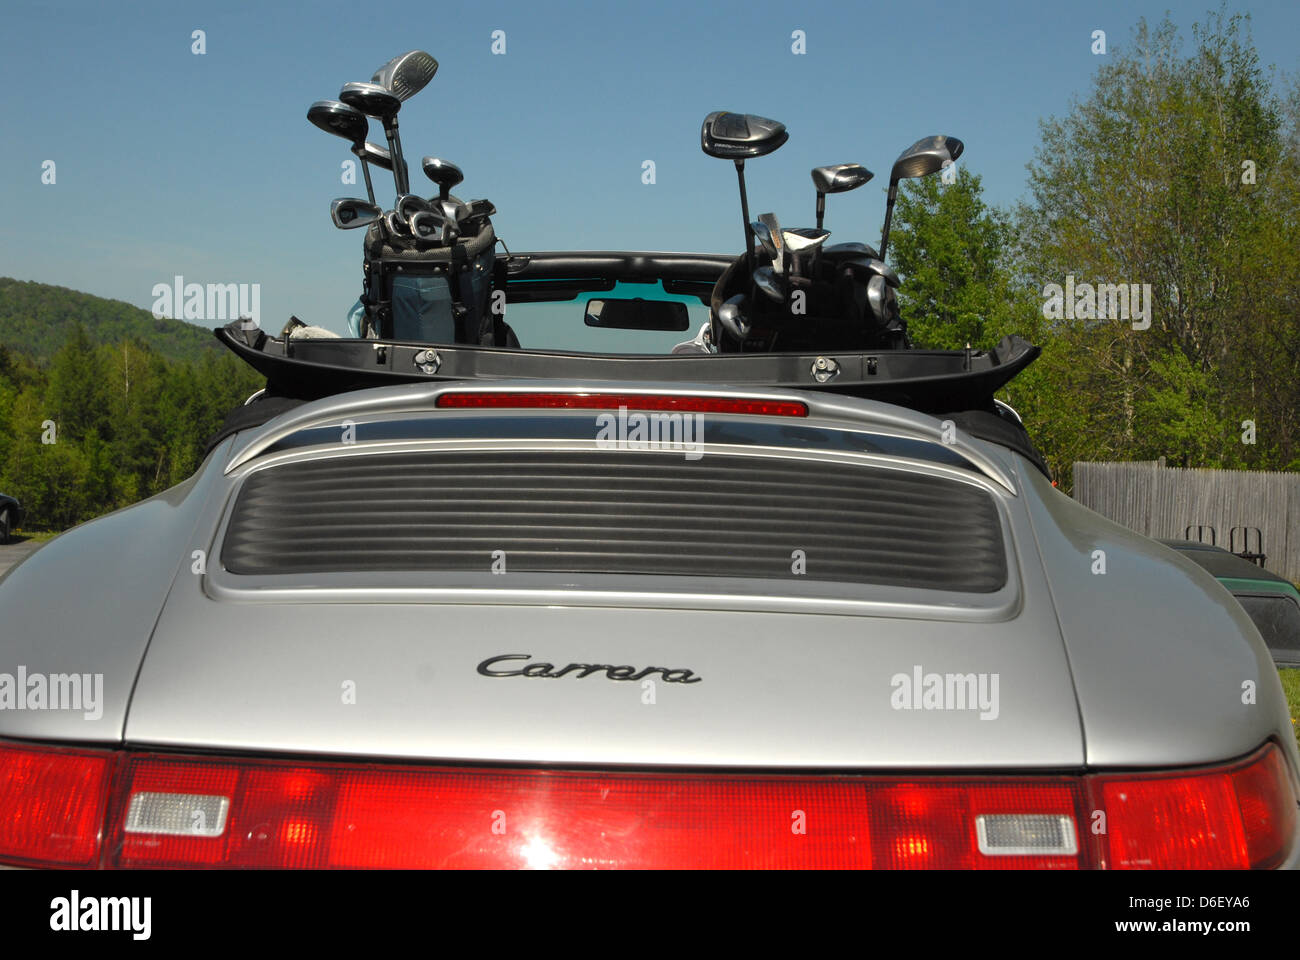 A pair of golf bags sit in the back seat of a Porsche Carrera awaiting use  Stock Photo - Alamy